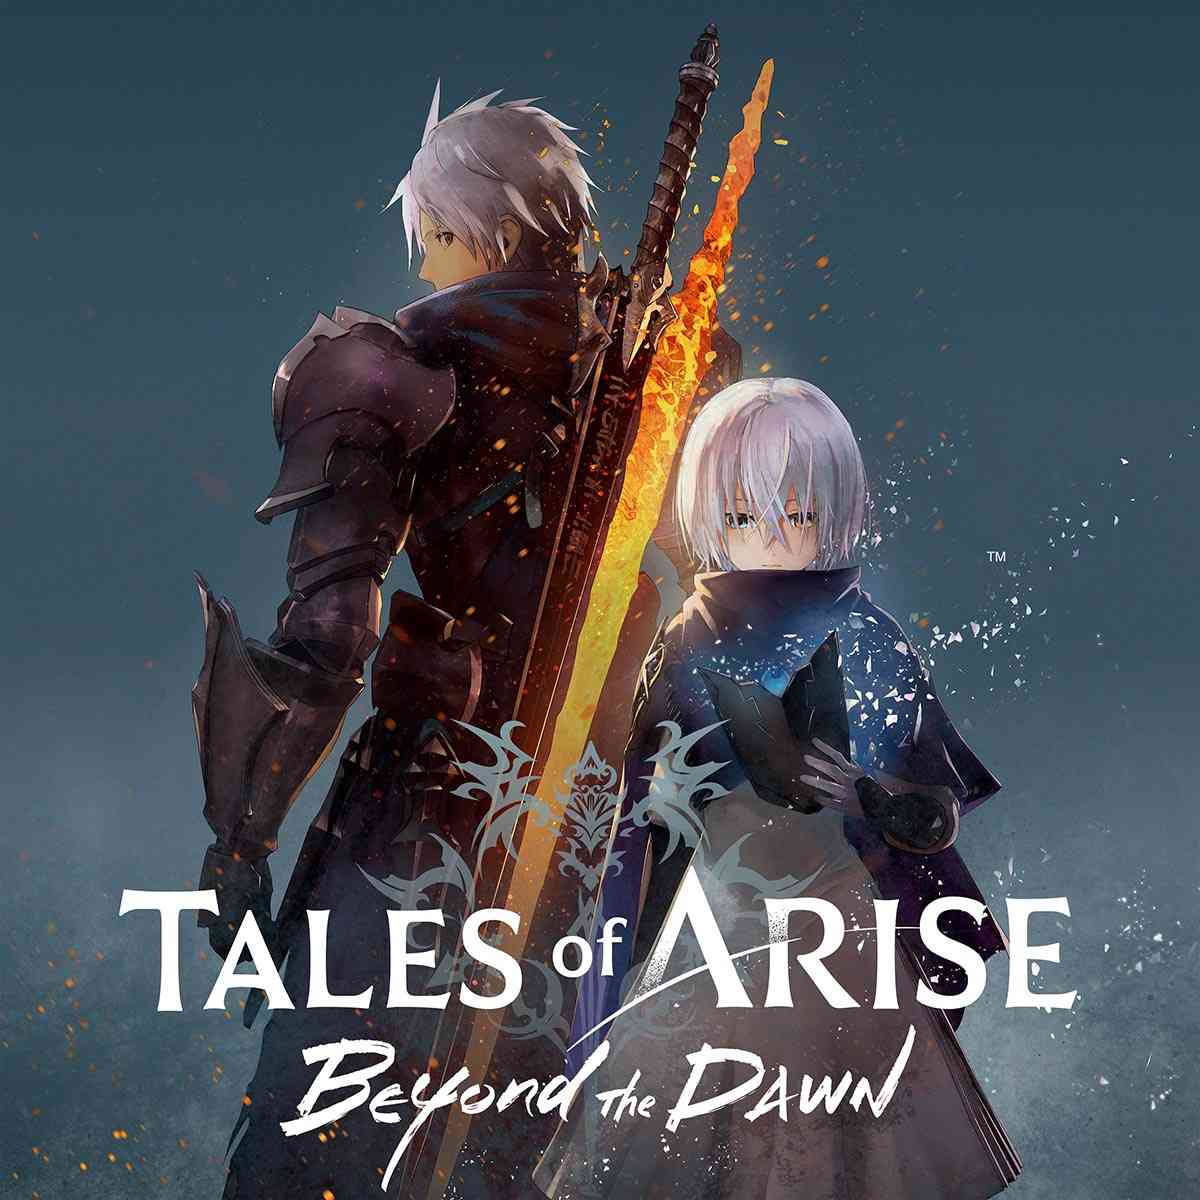 Tales of Arise - Beyond the Dawn (Original Soundtrack)